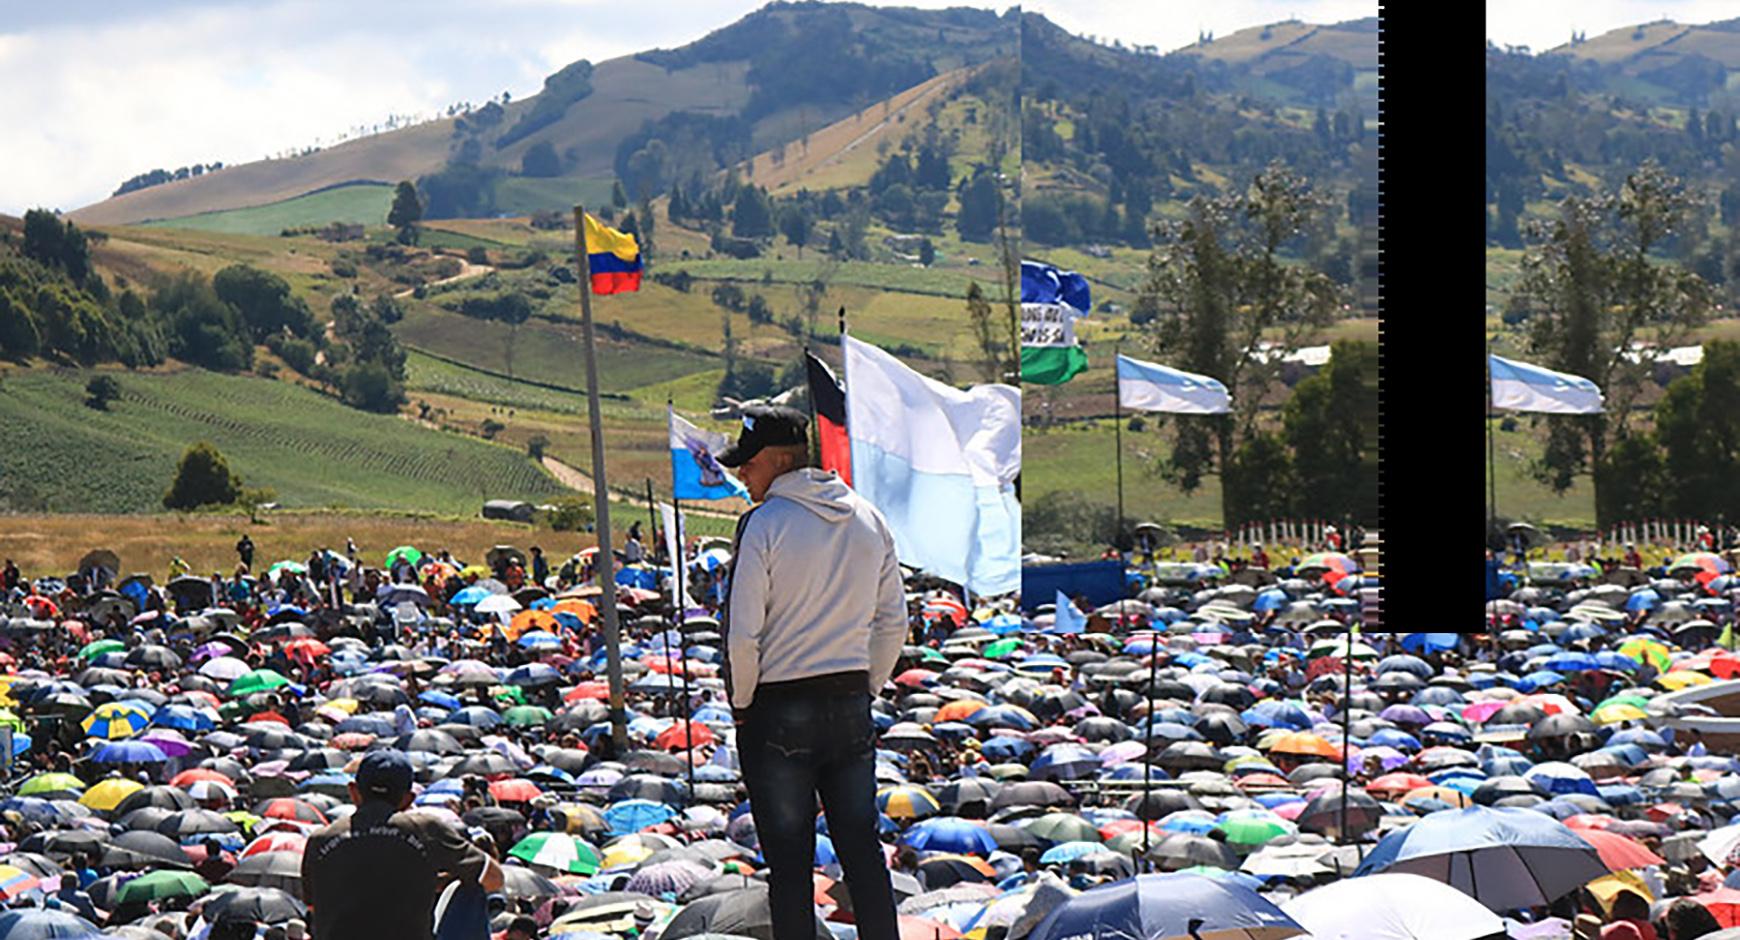 Man standing above field of umbrellas at rally. Feature image taken in Boyacá, Colombia, by Sofia Mock.